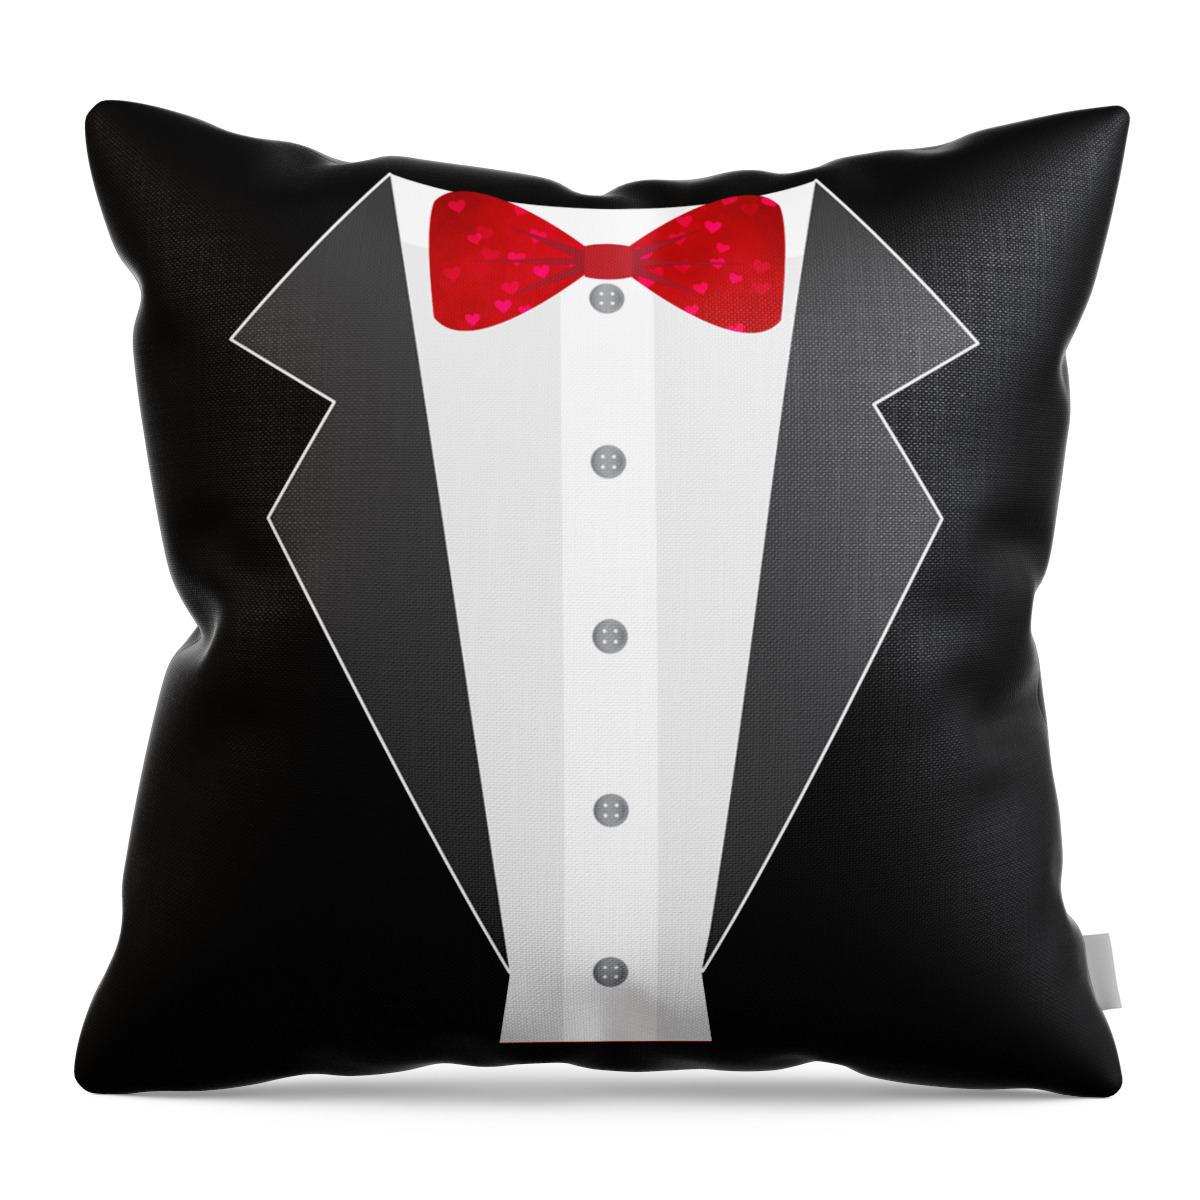 Cool Throw Pillow featuring the digital art Valentines Day Heart Bow Tie Tuxedo Costume by Flippin Sweet Gear